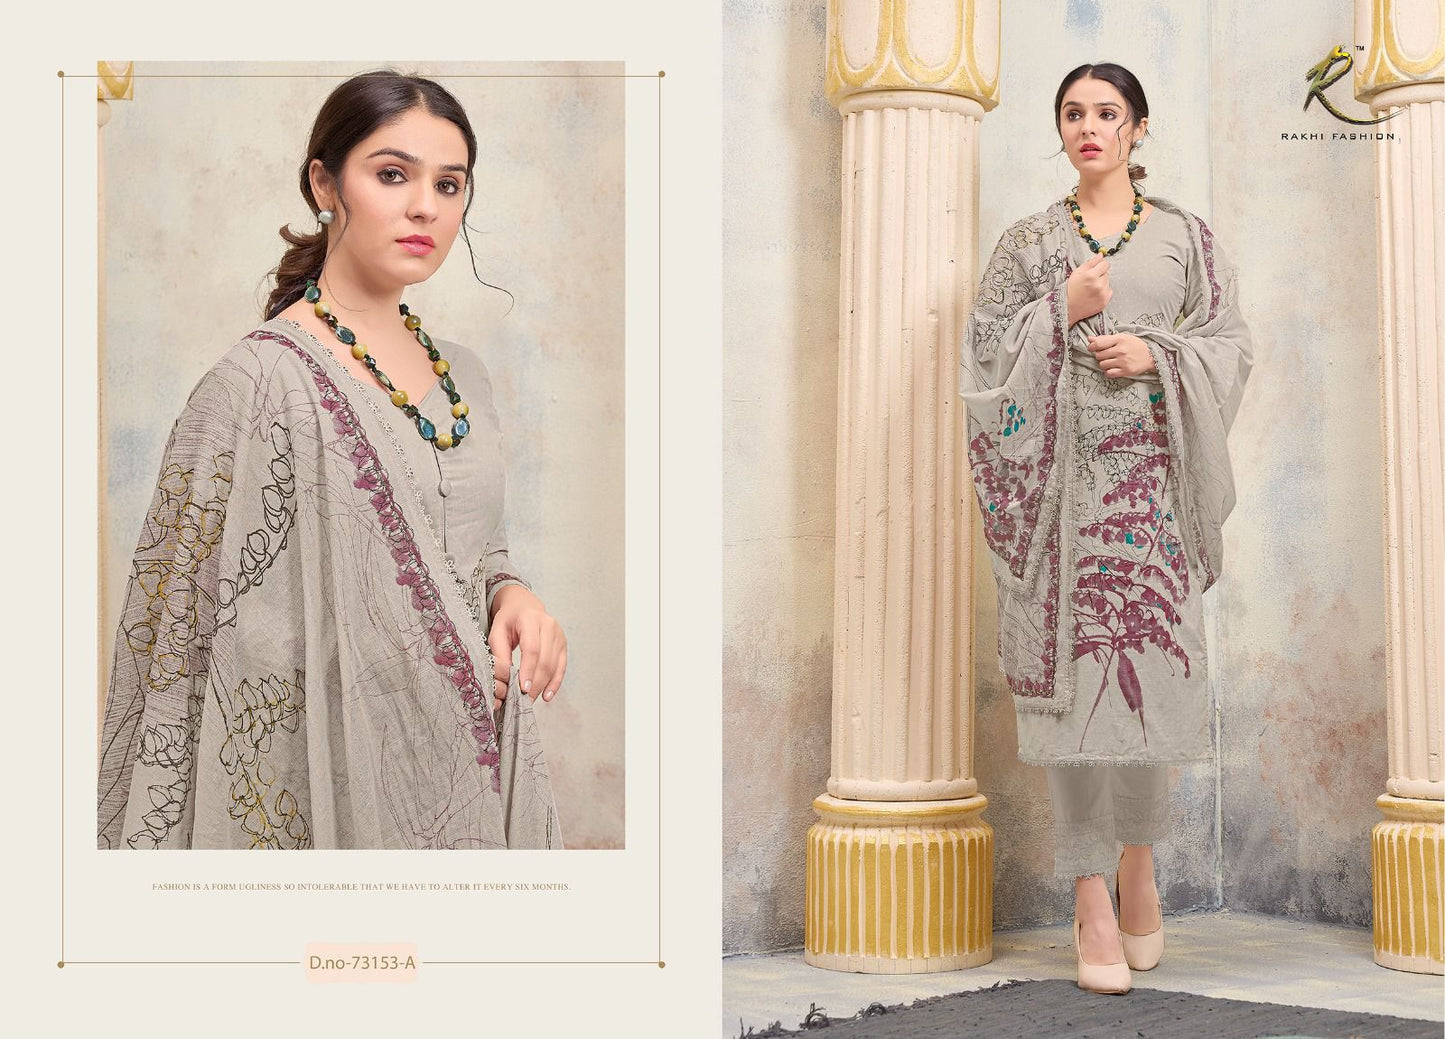 The Artistic Look Rakhi Fashion Cotton Plazzo Style Suits